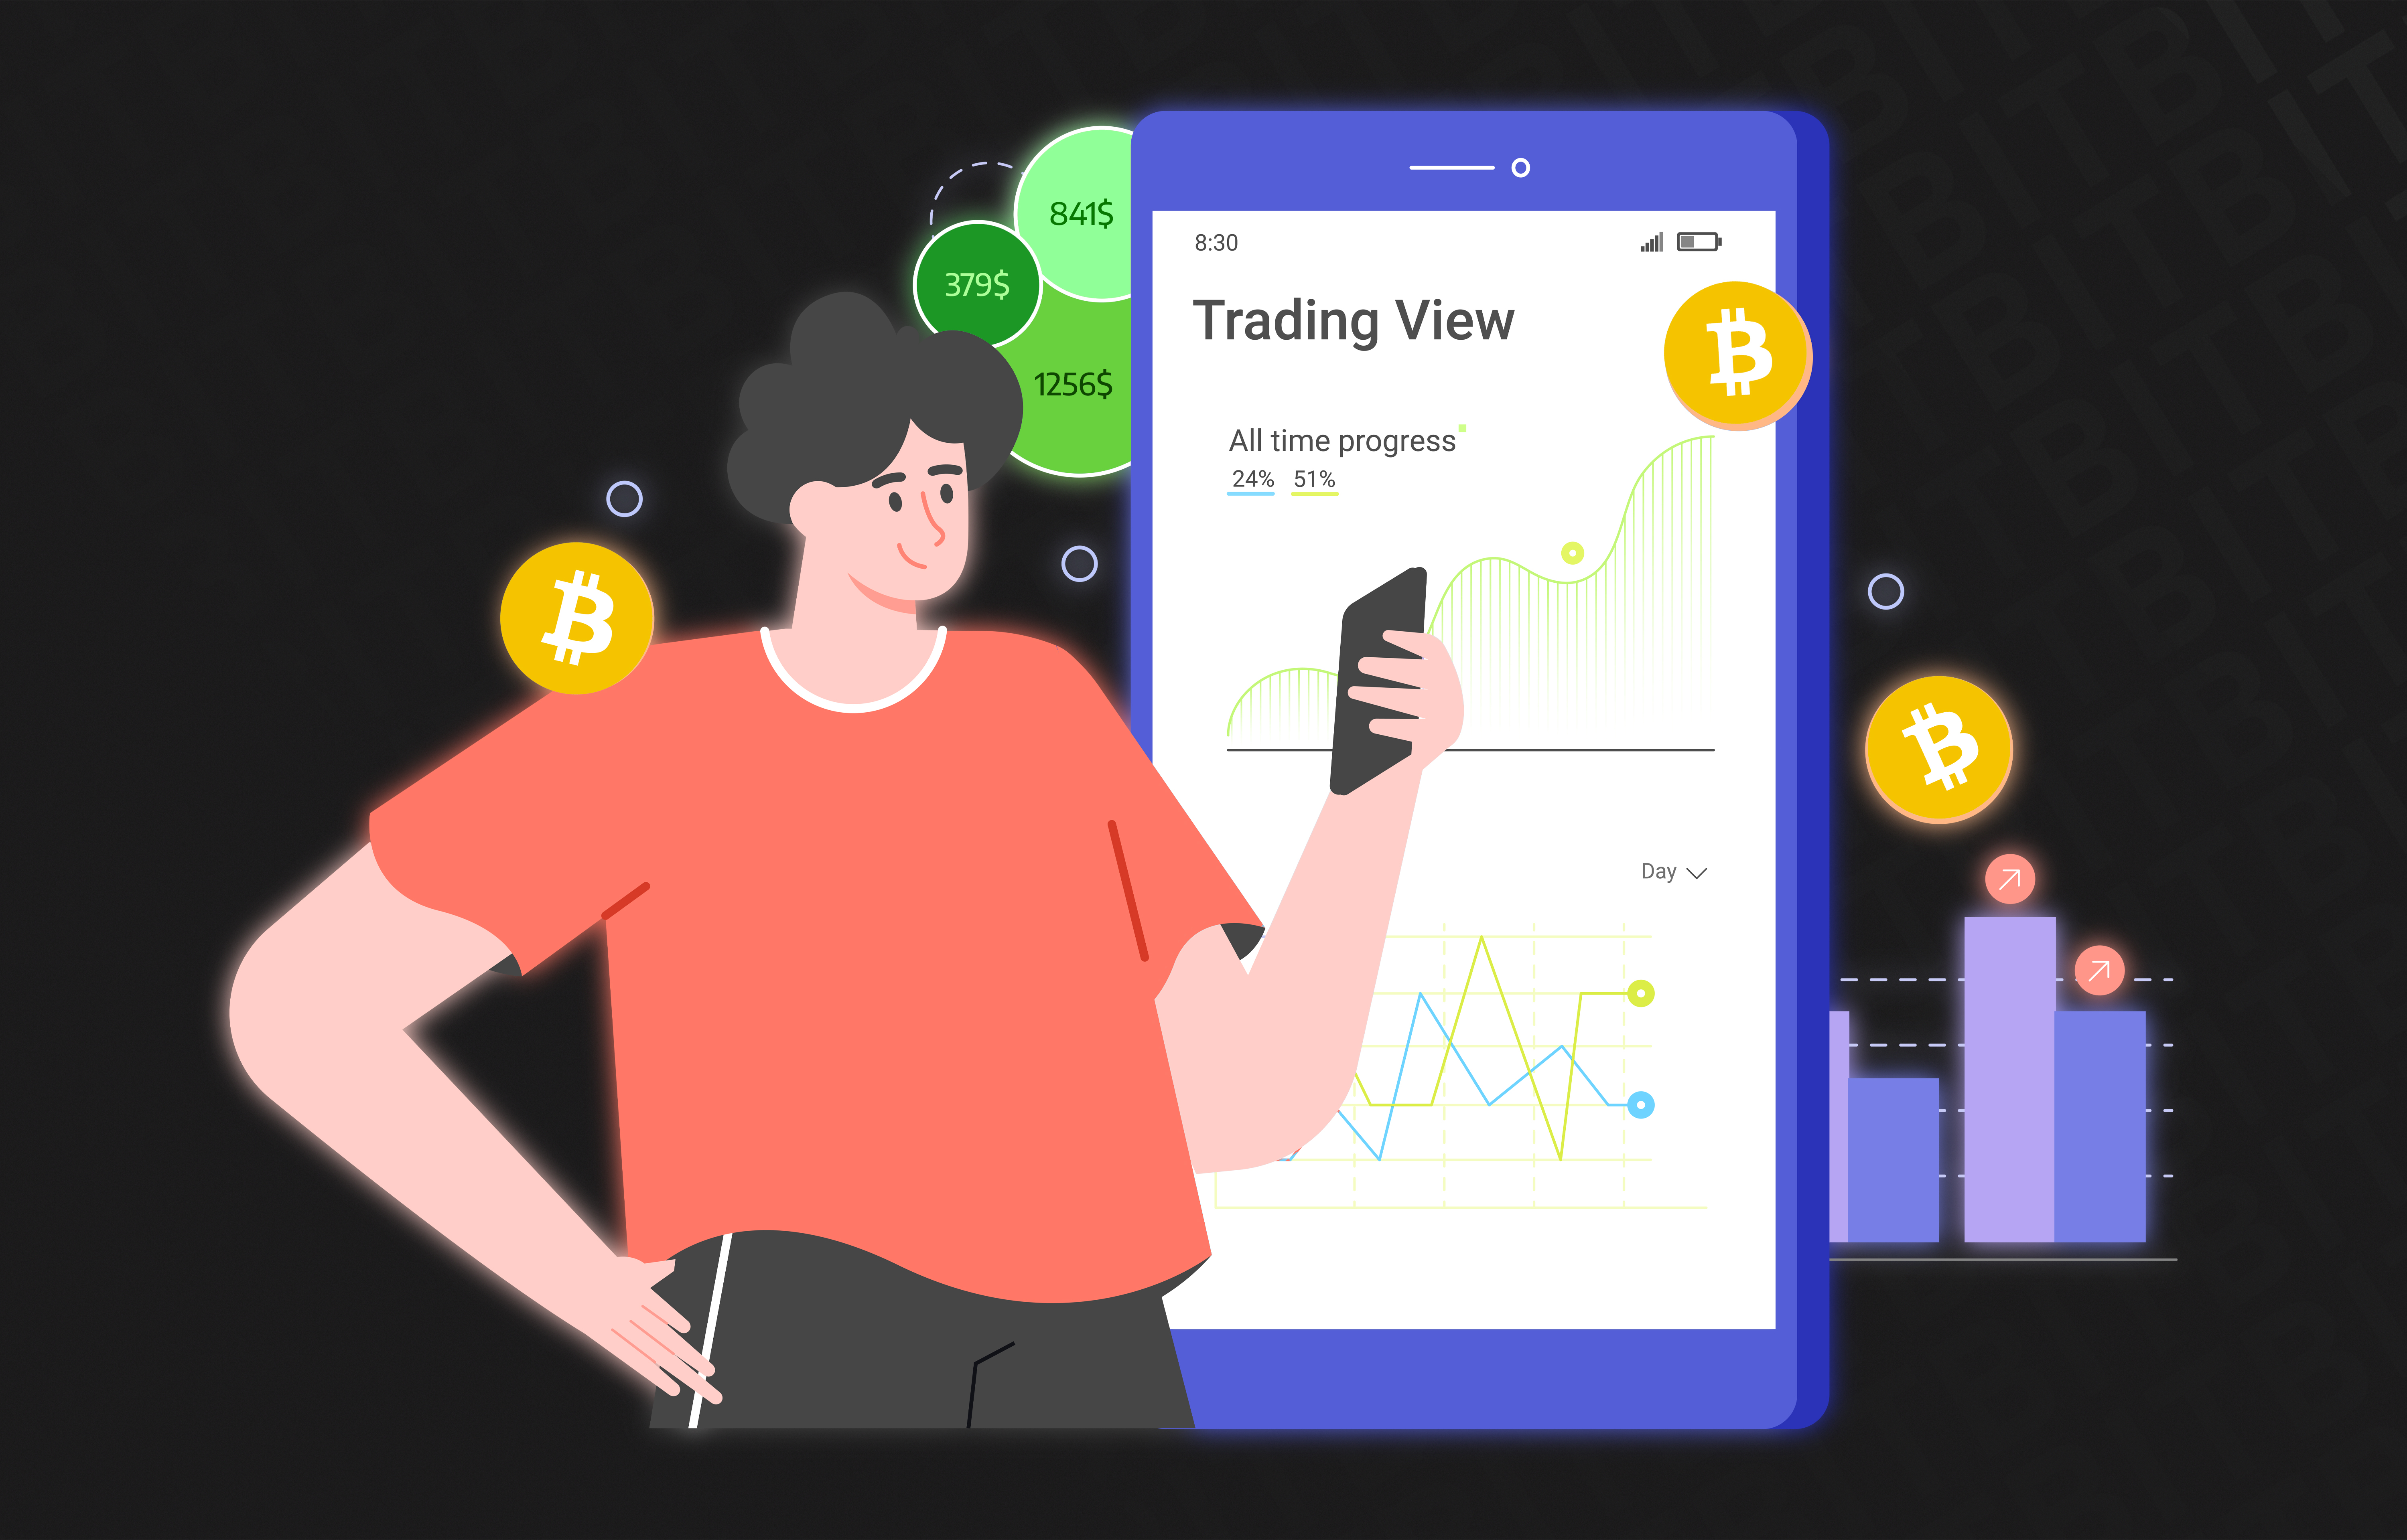 On the go trading